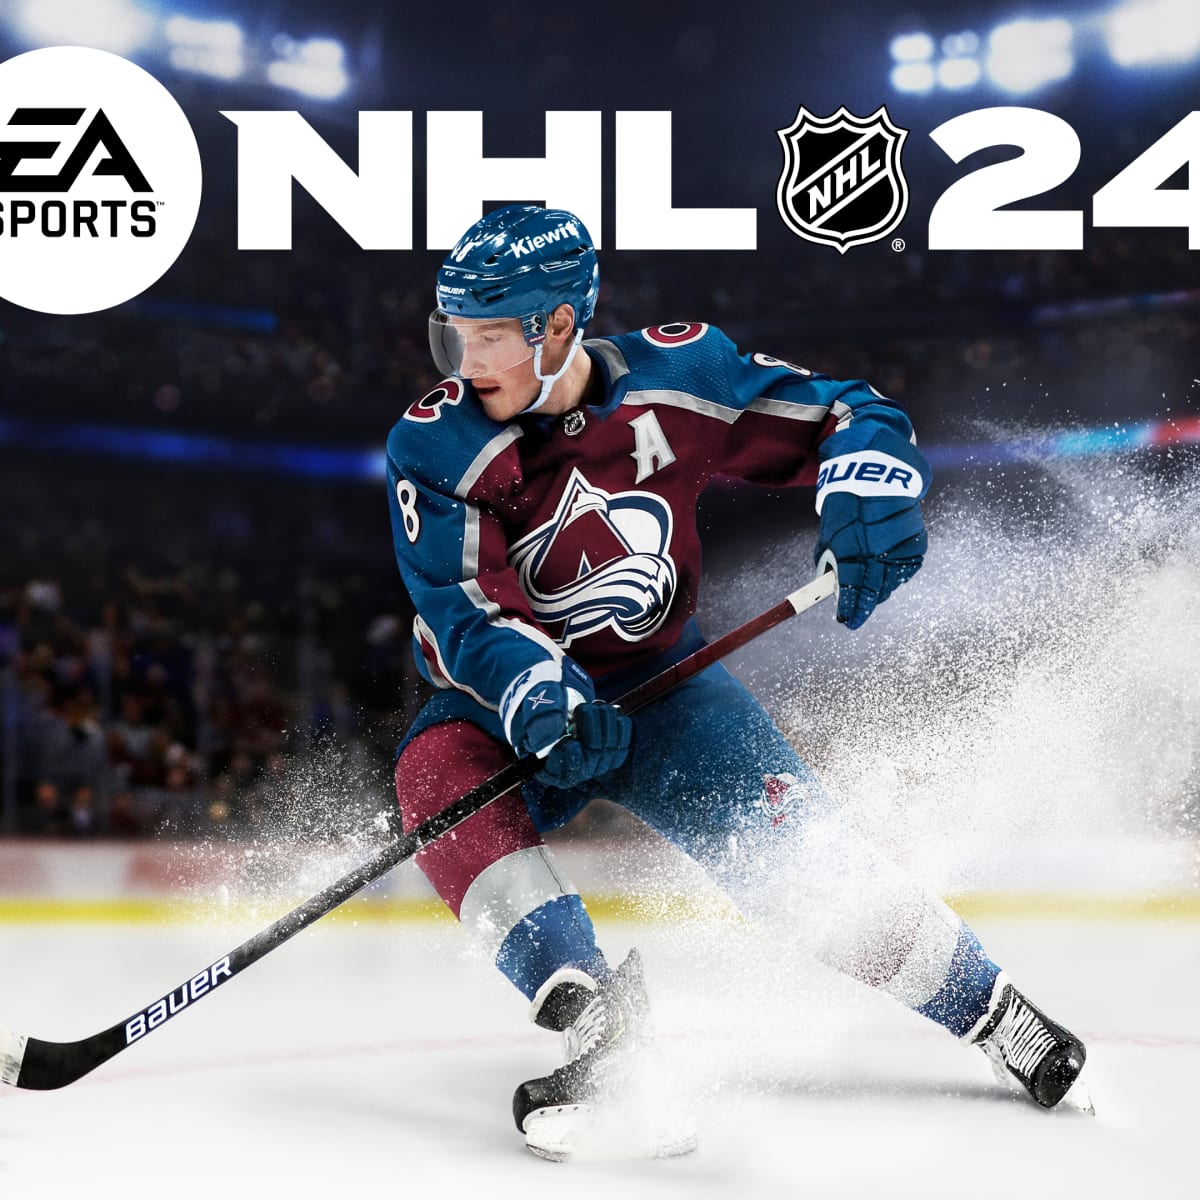 NHL 24 - What's New In World Of Chel - The Hockey News Gaming News,  Analysis and More